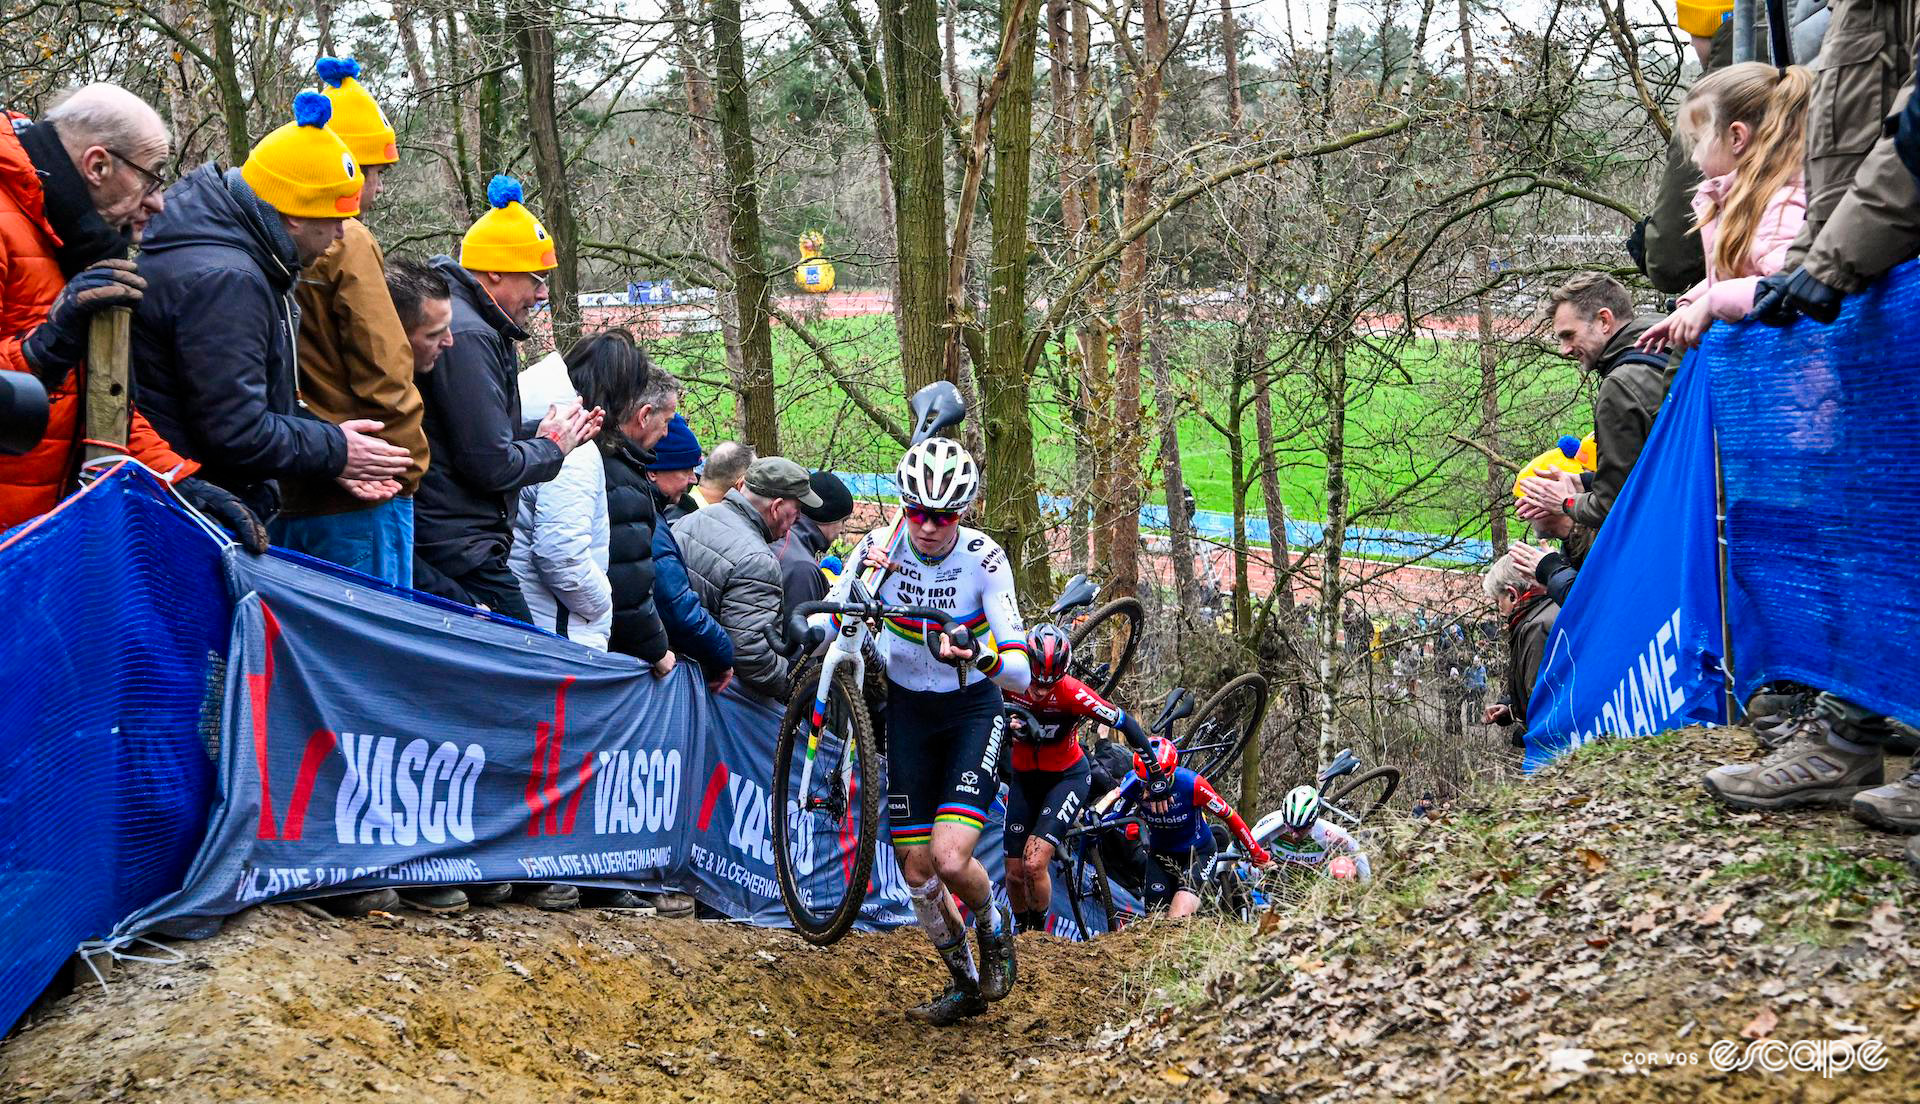 World champion Fem van Empel leads Annemarie Worst, Lucinda Brand and the rest of the elite women up a steep climb on foot during X2O Trofee Herentals.